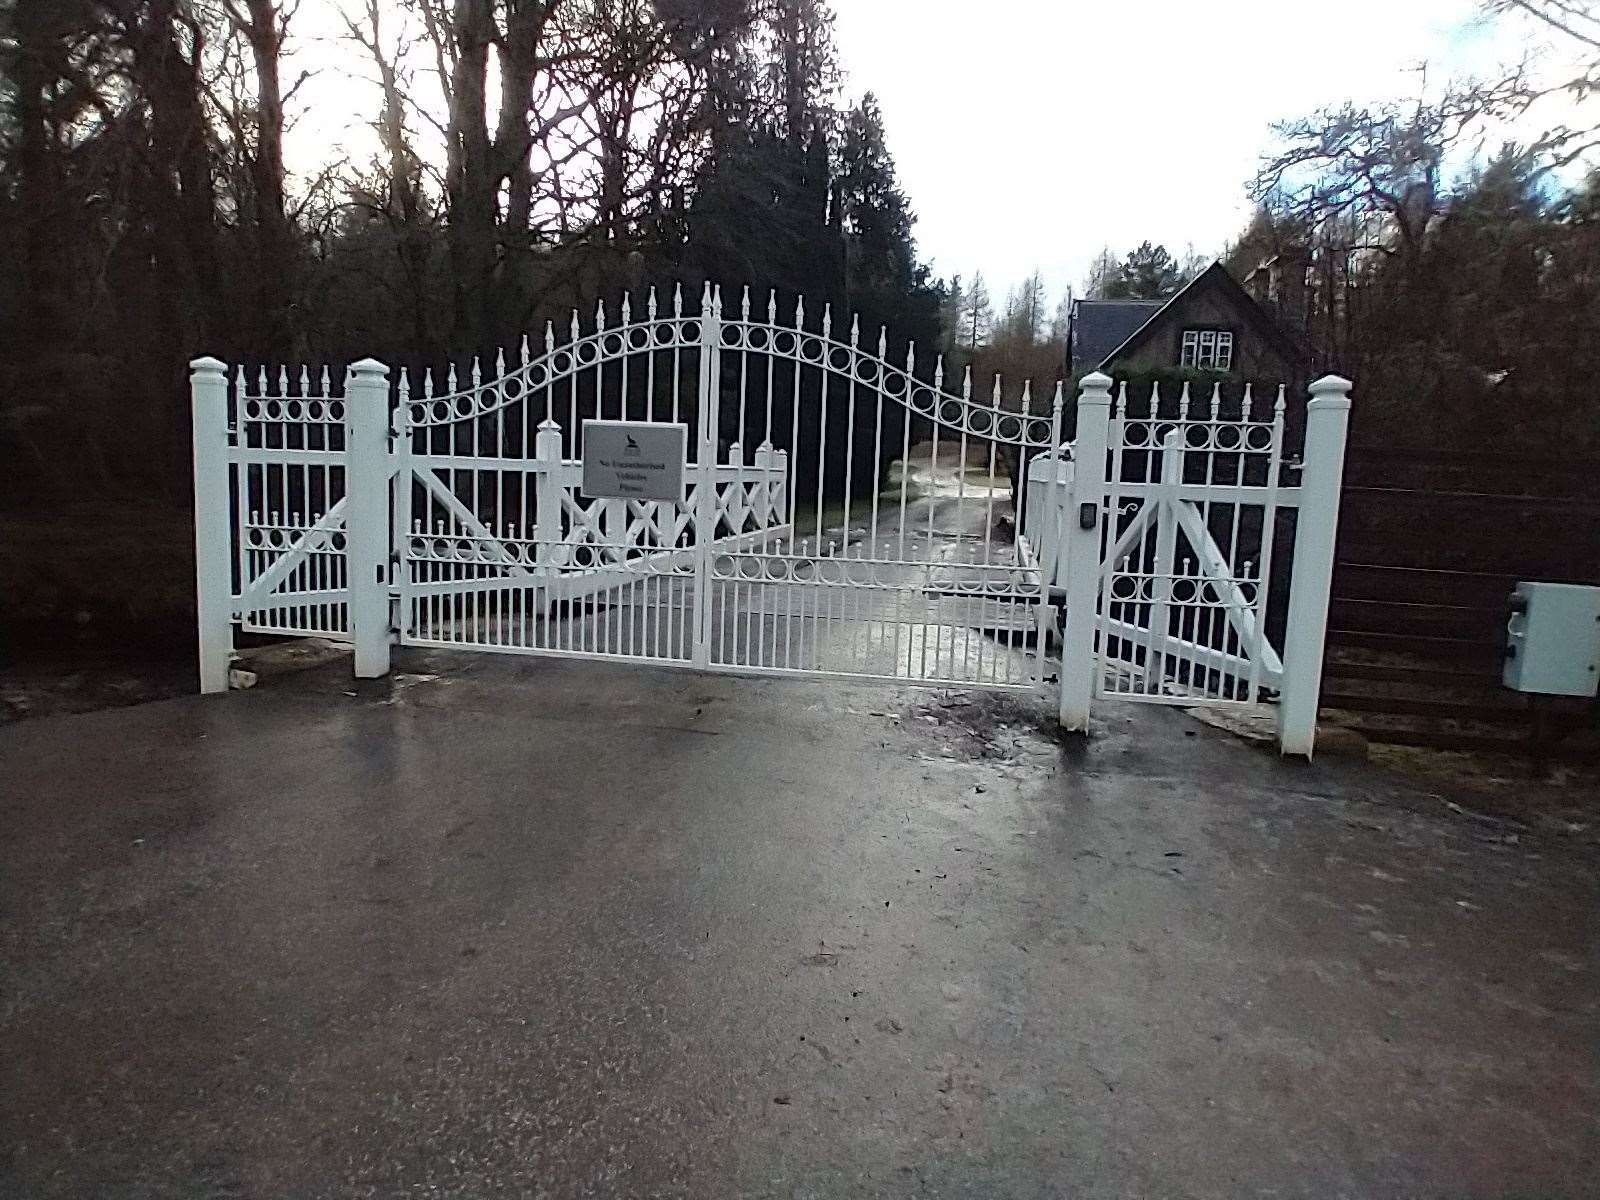 As is so often the case in the Highlands, there's a gate to negotiate at the start of the walk. But fear not, it opens easily at the side and you are perfectly entitled to pass through.